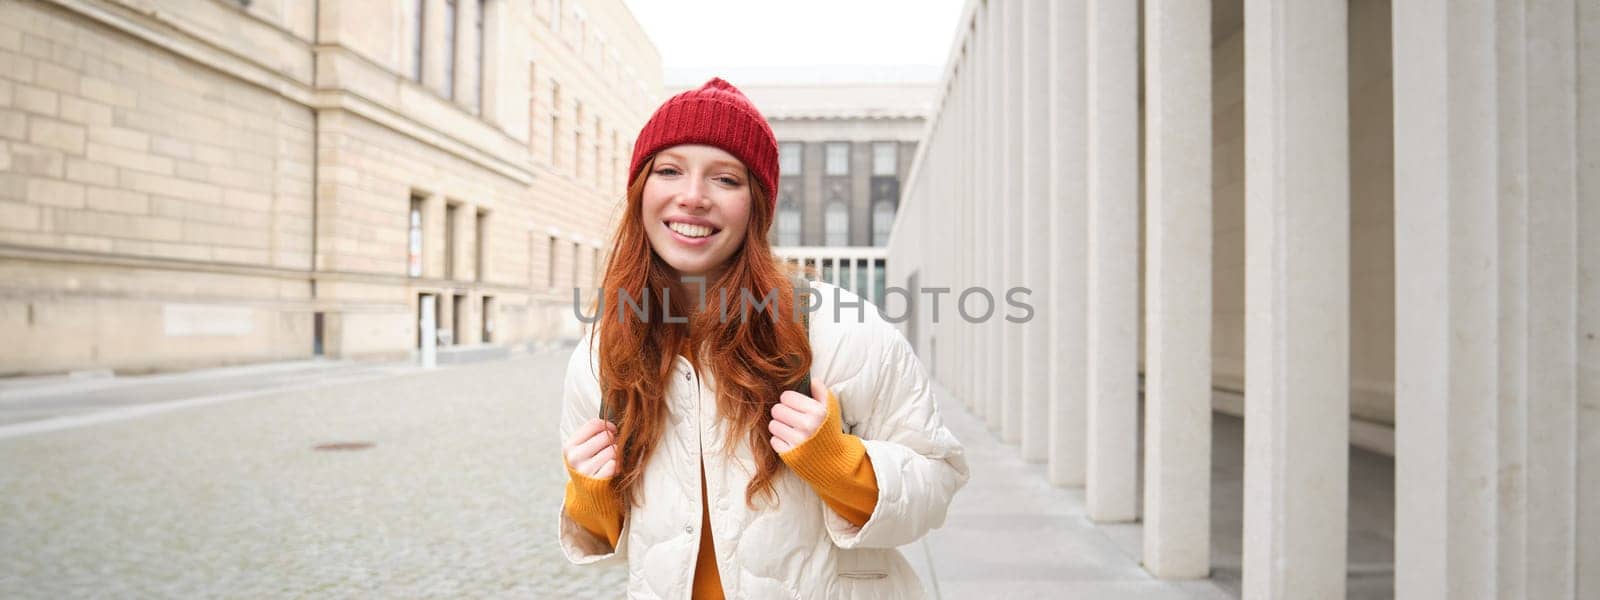 Female tourist in red hat with backpack, sightseeing, explores historical landmarks on her trip around europe, smiling and posing on street.